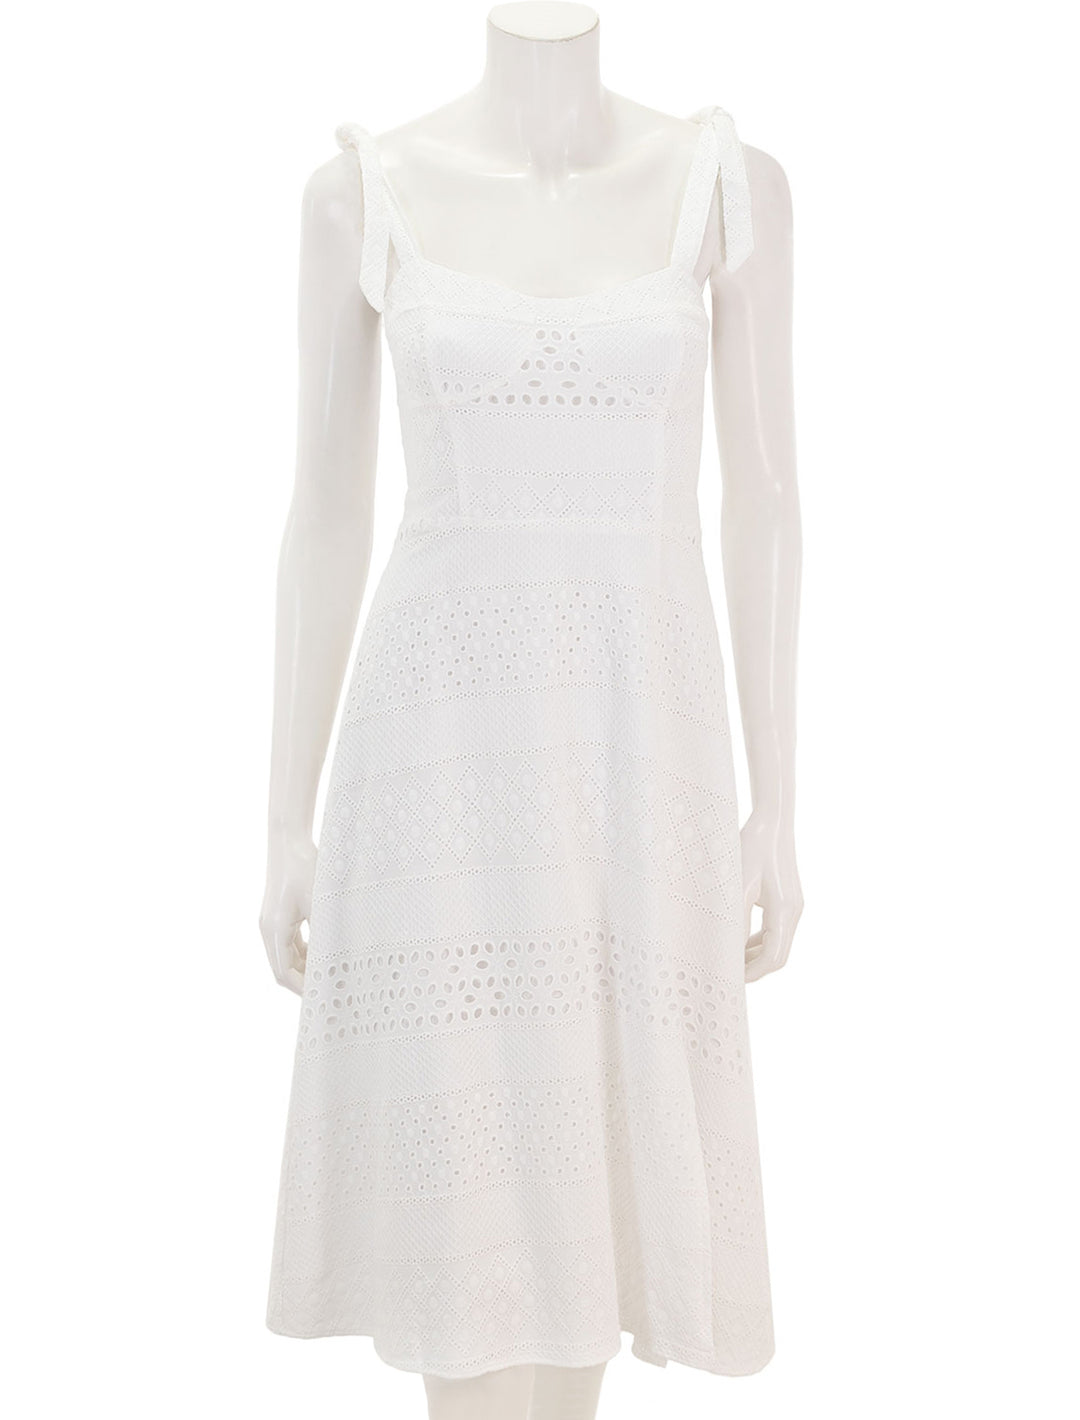 Front view of Steve Madden's carlynn dress in white.